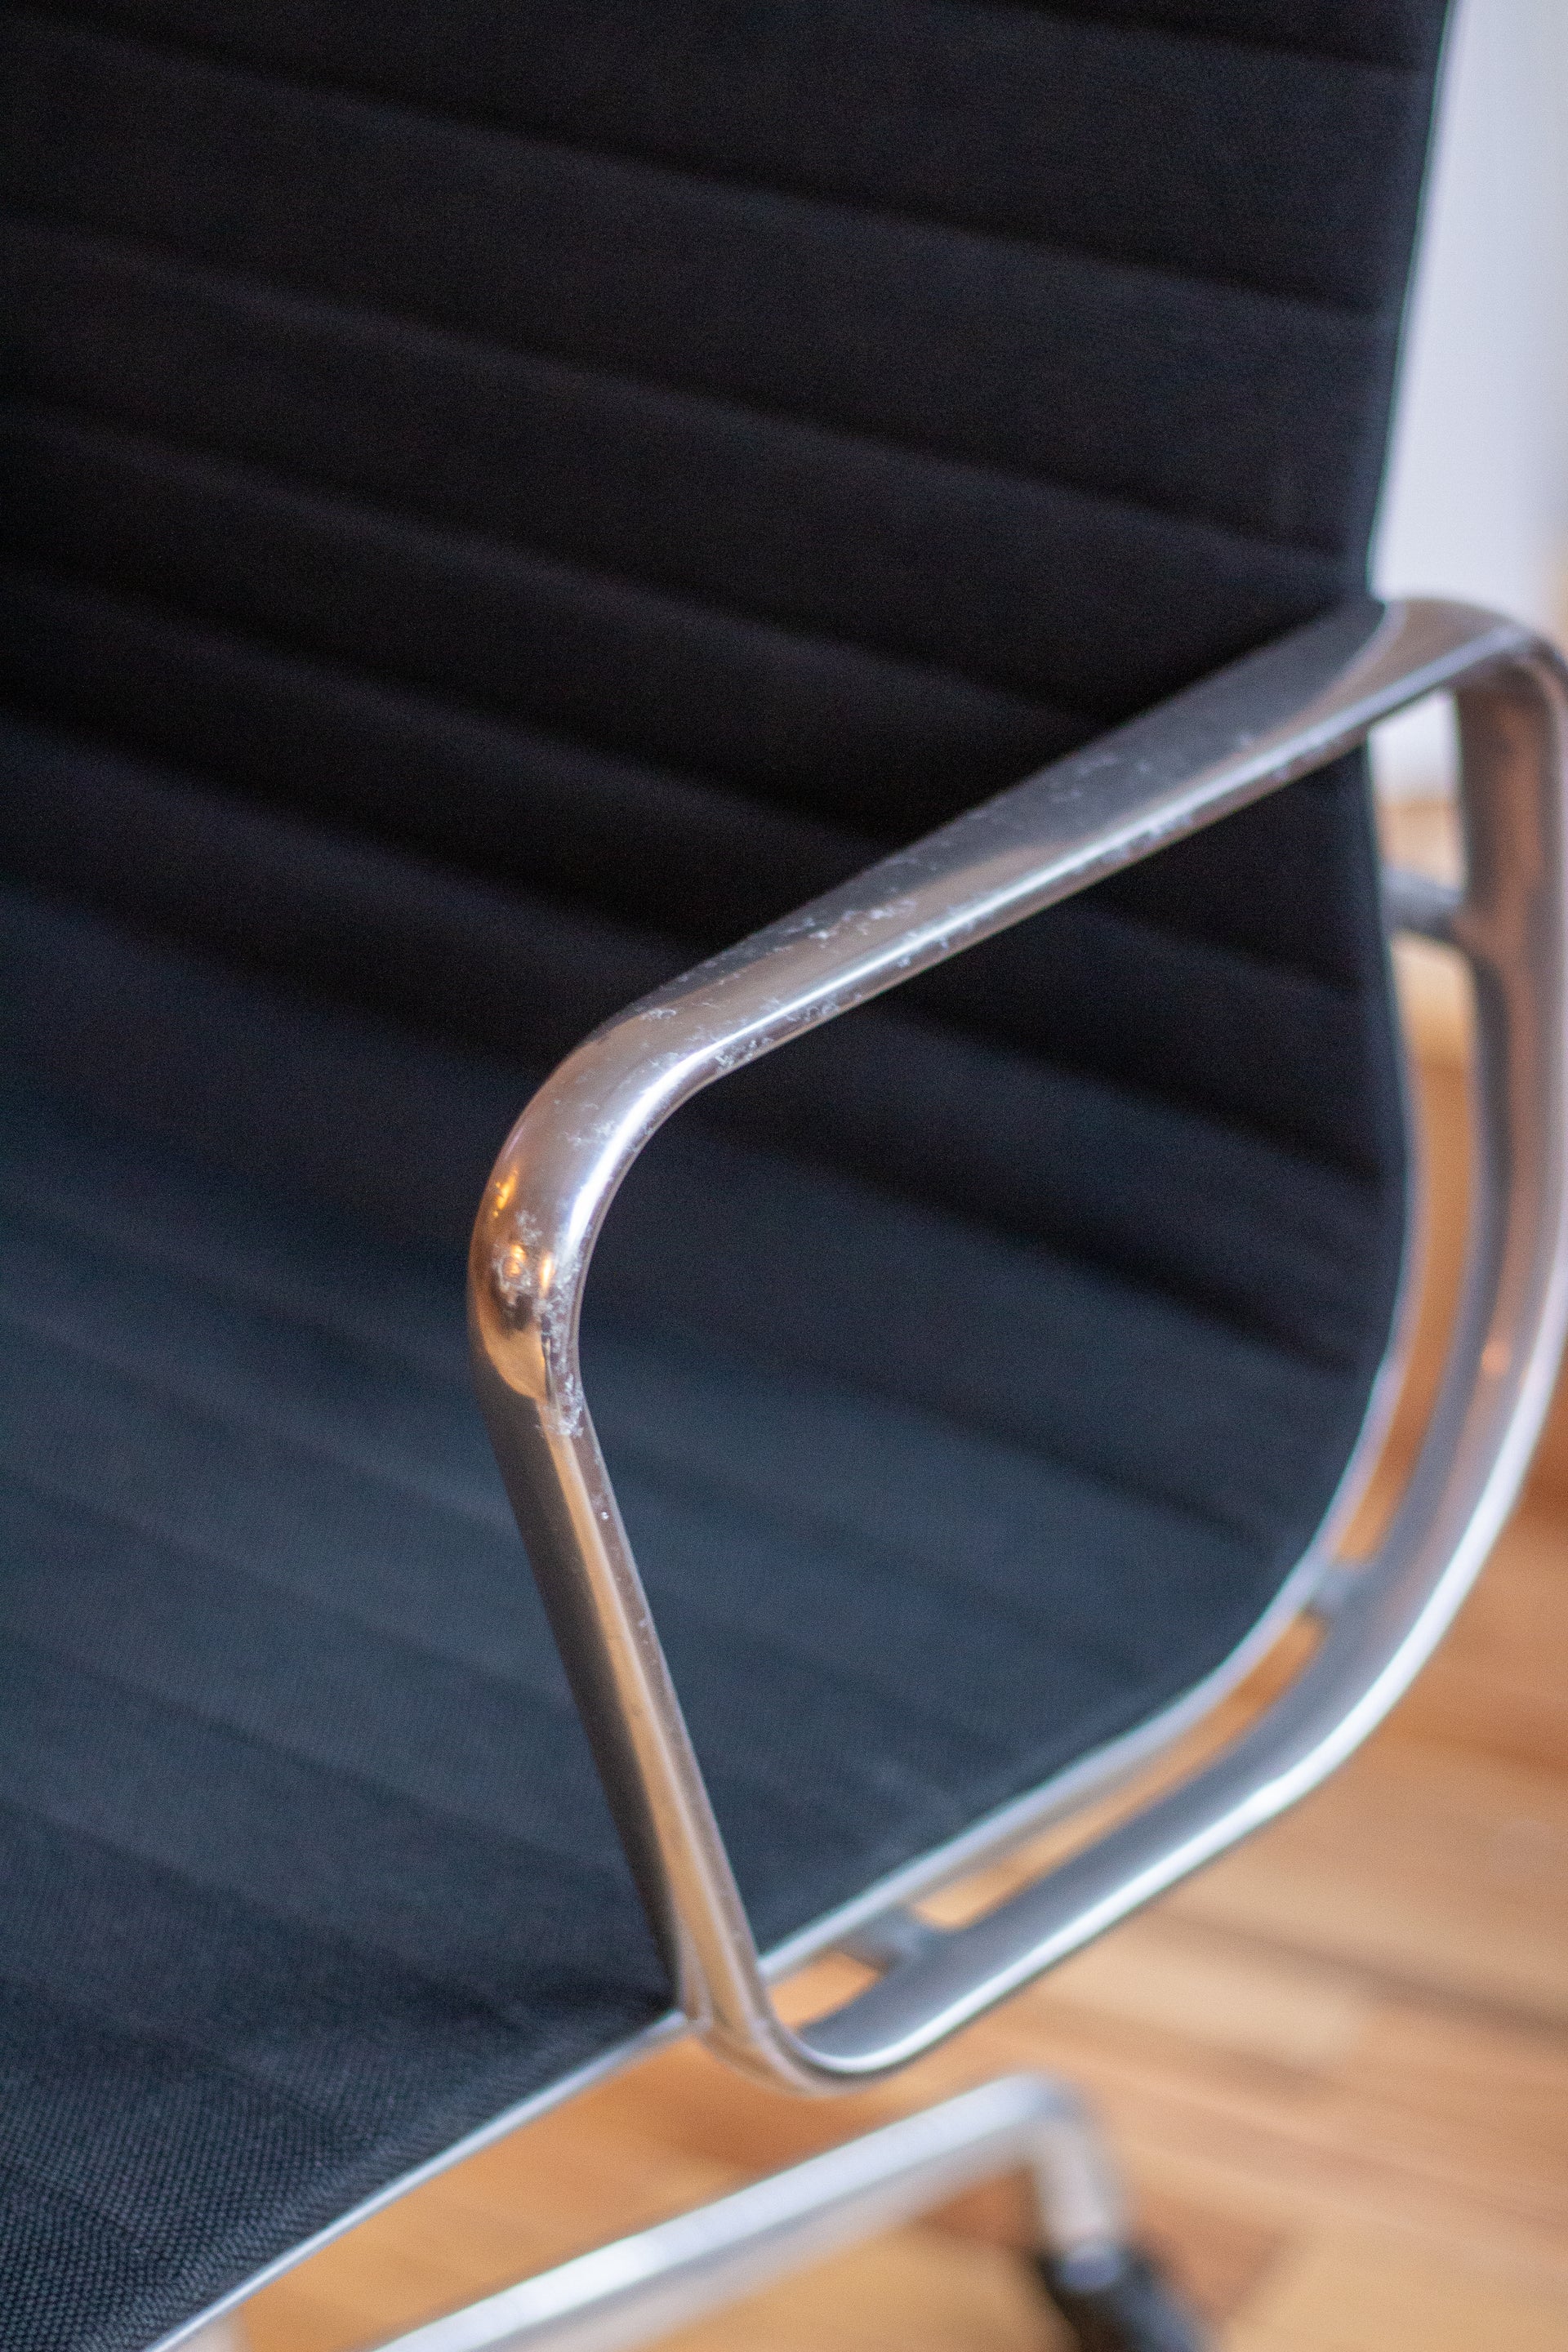 Eames Aluminum Group Management Chair (Black Upholstery)